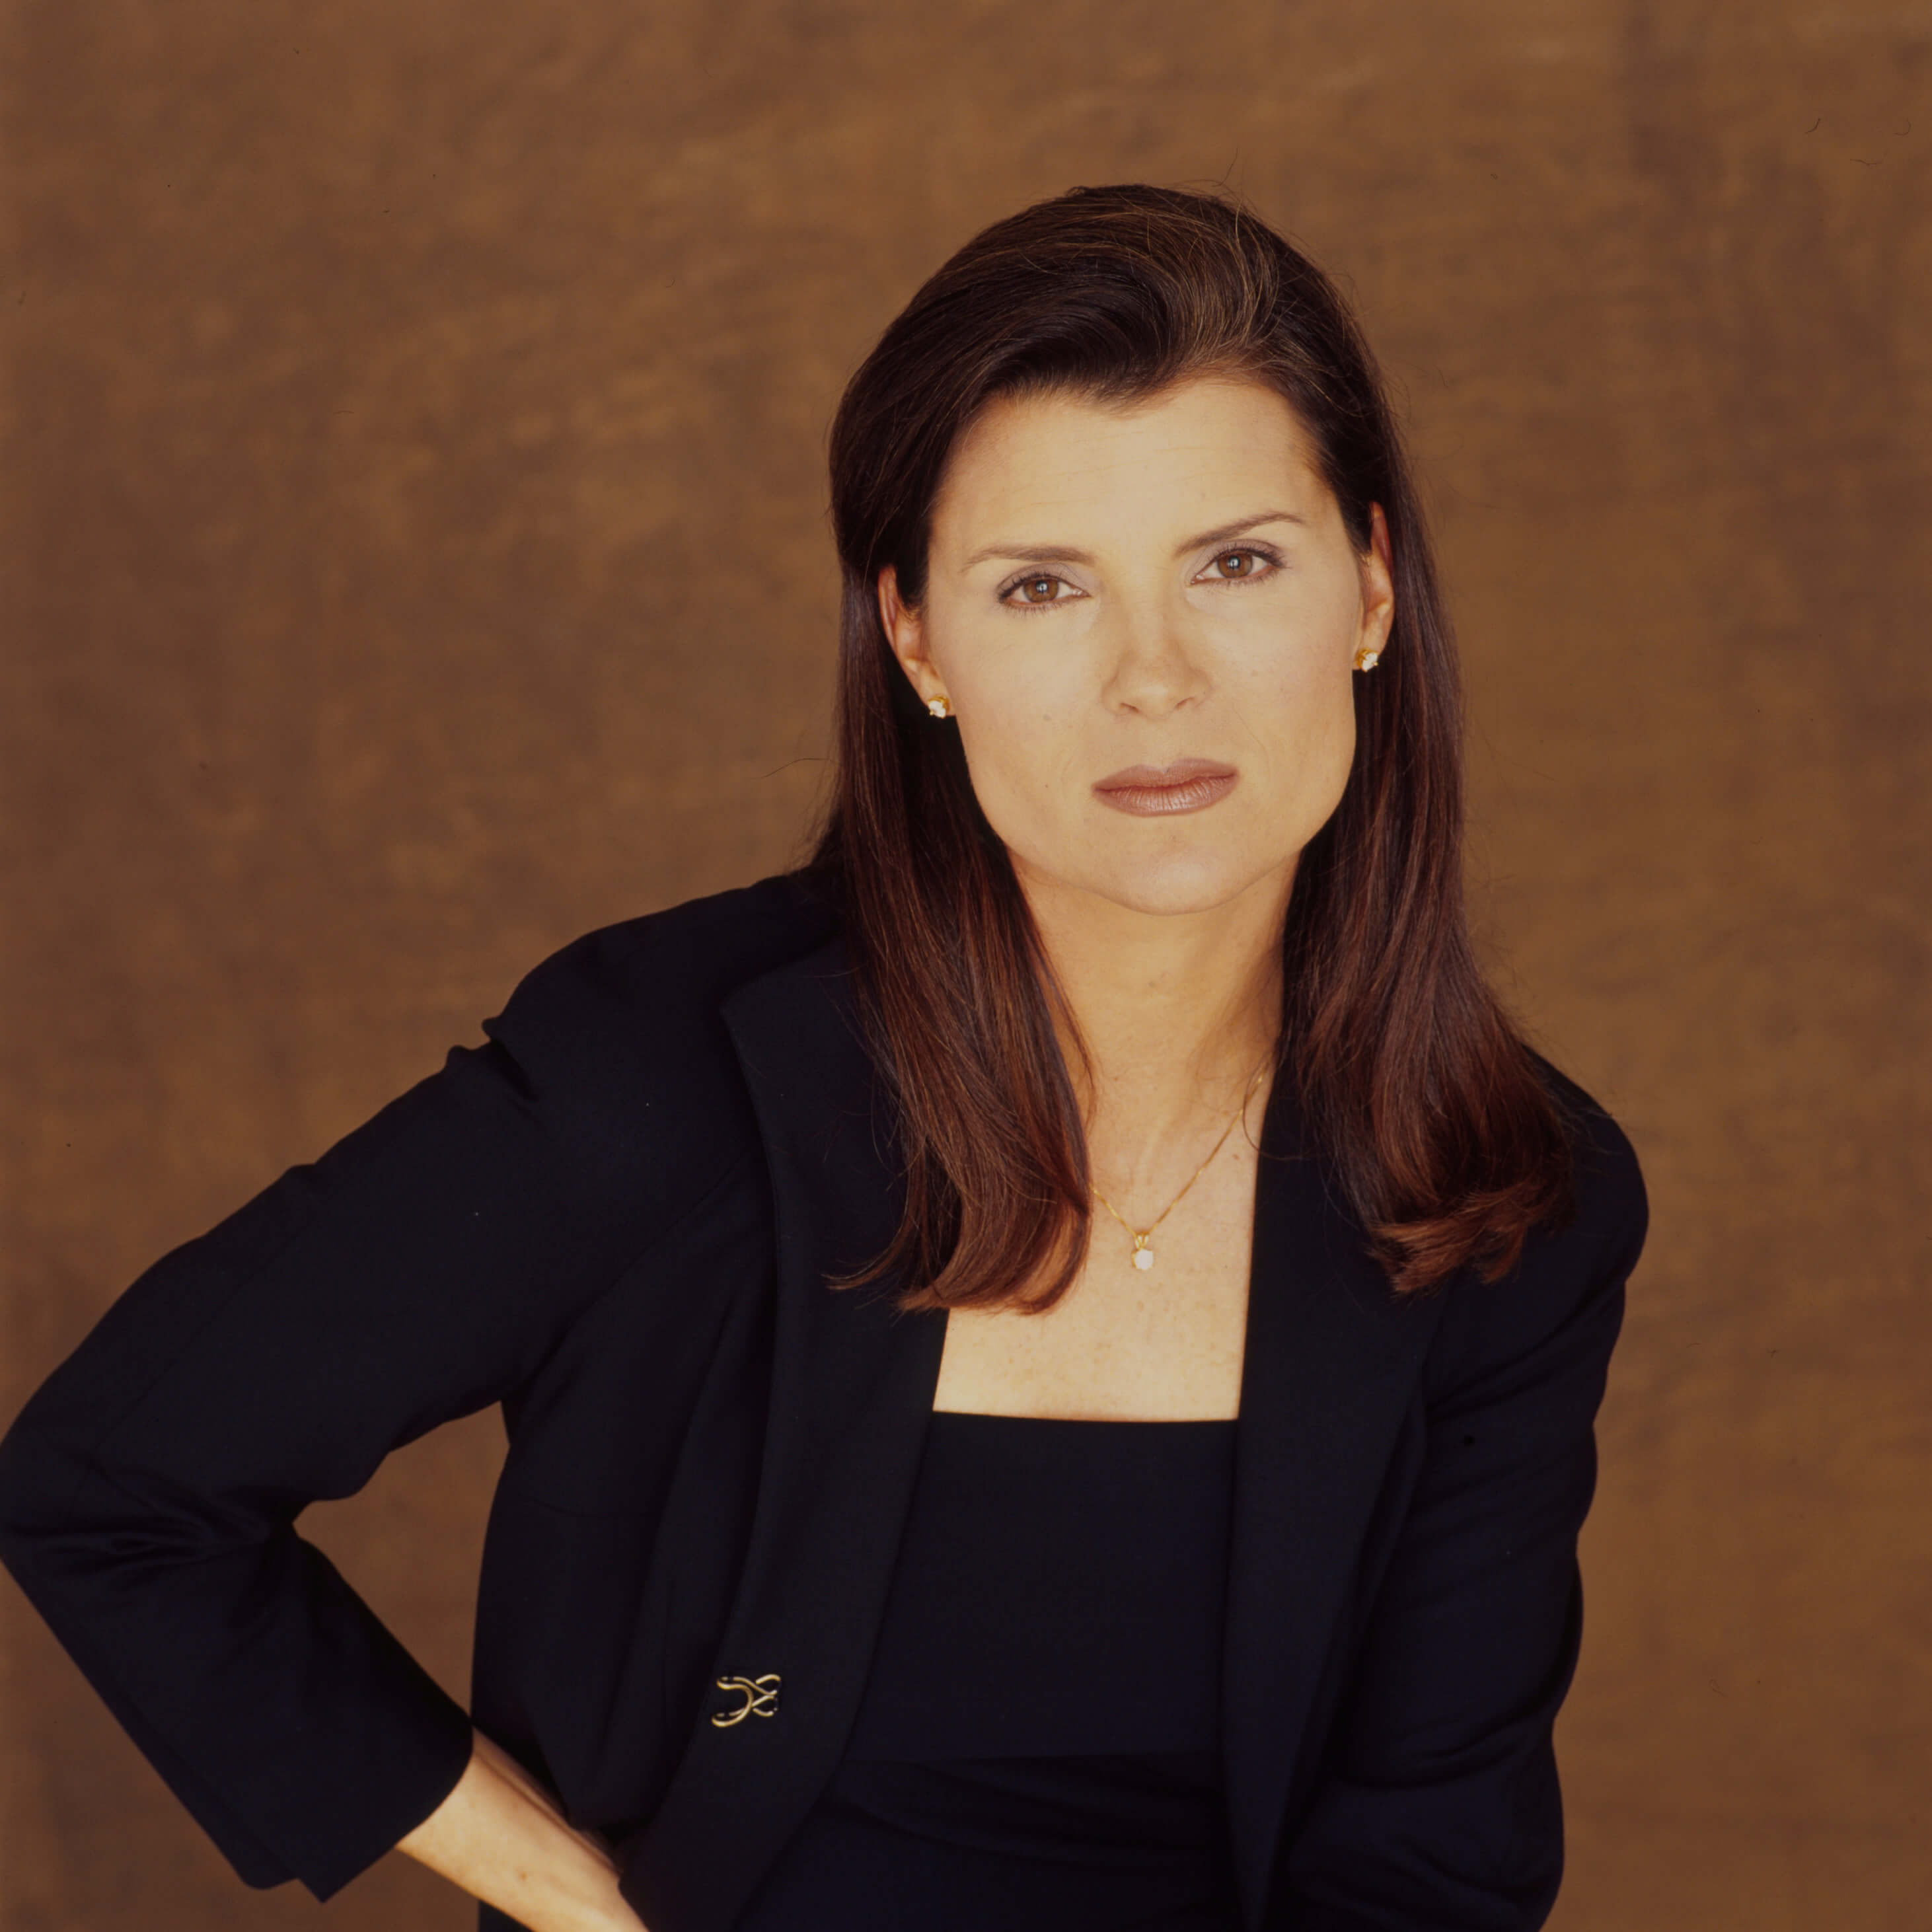 'The Young and the Restless' star Kimberlin Brown dressed in a blue suit; posing in front of a brown backdrop.